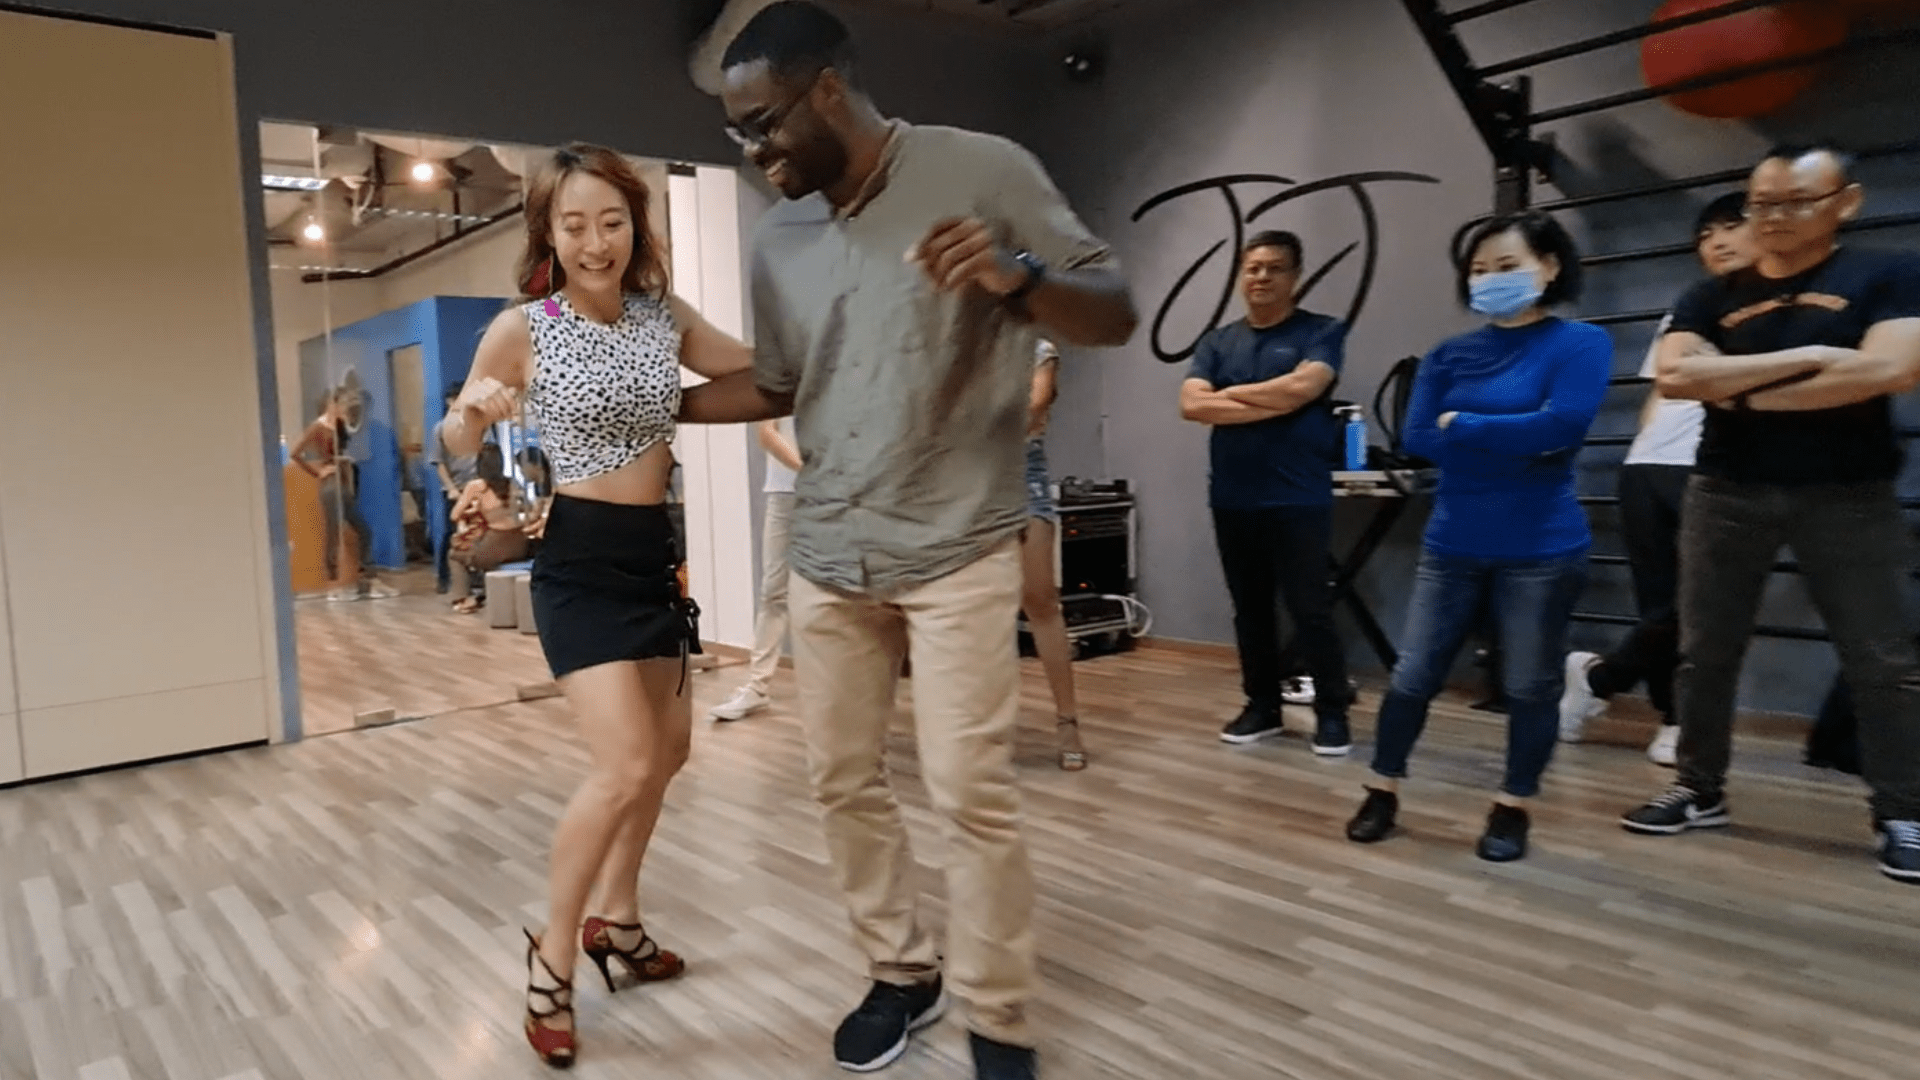 An Image of a Man and a Woman Dancing Kizomba in a Dance Studio with Students Watching While Standing